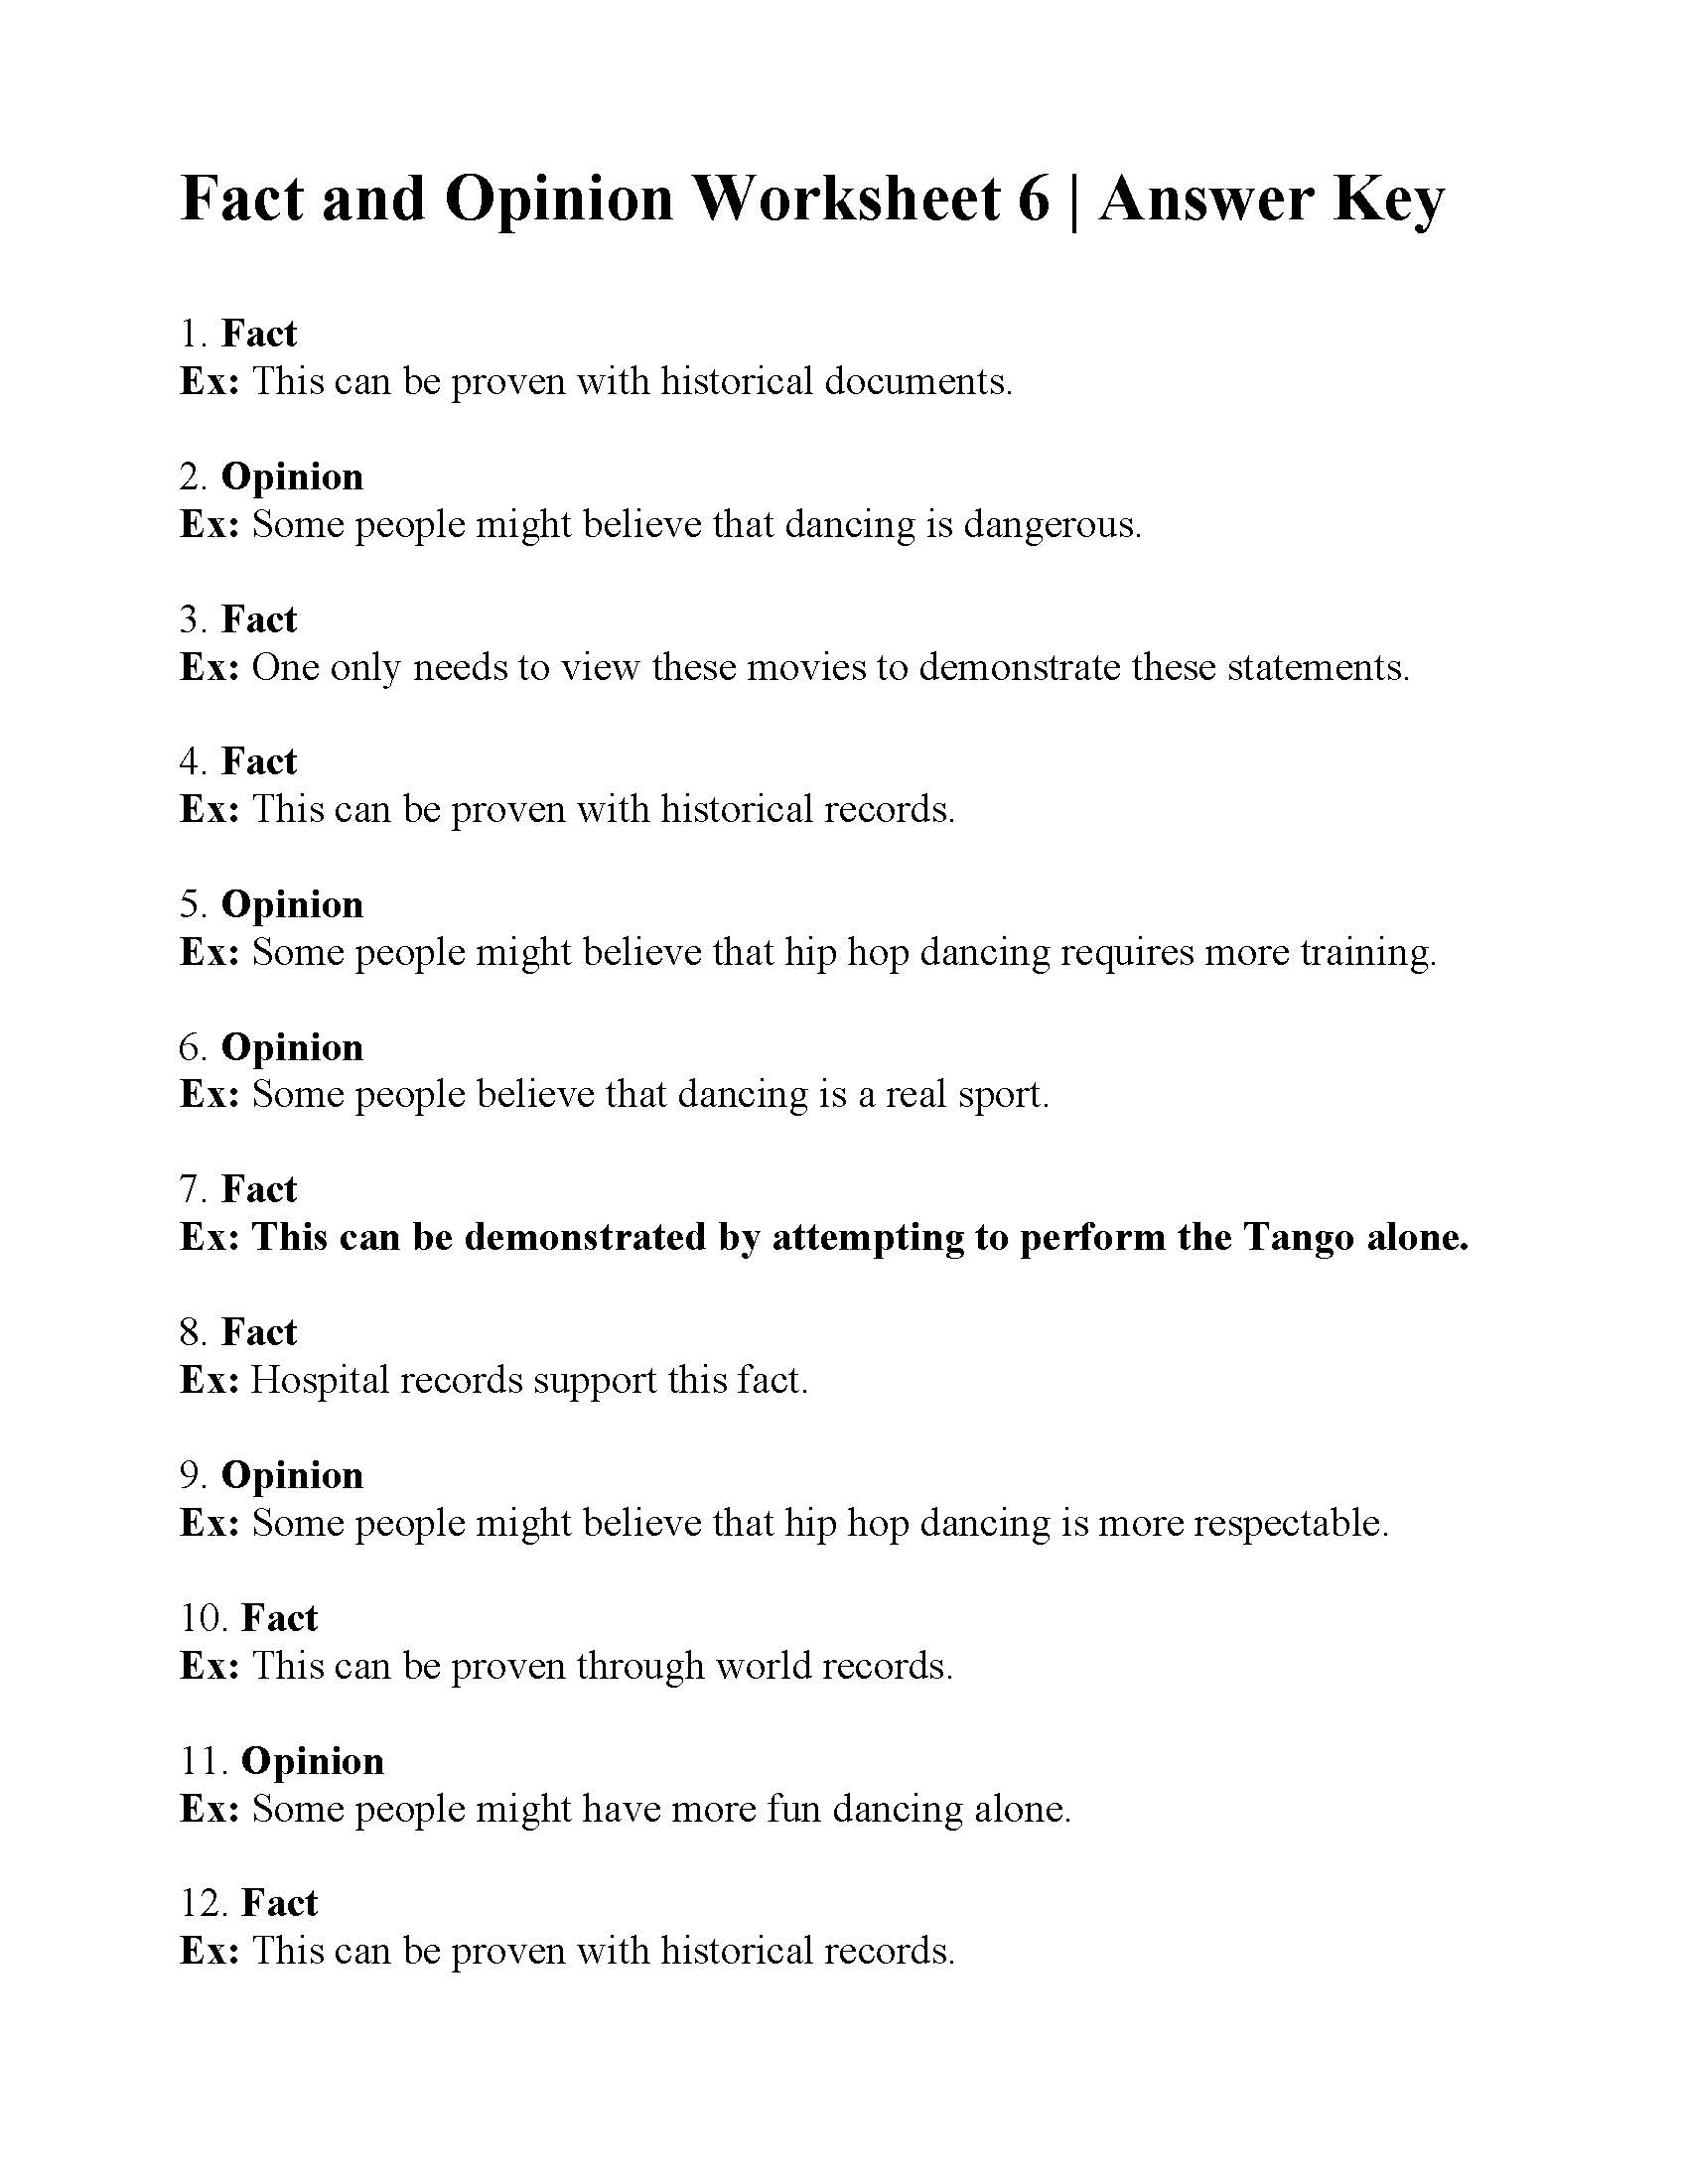 fact-and-opinion-worksheet-6-reading-activity